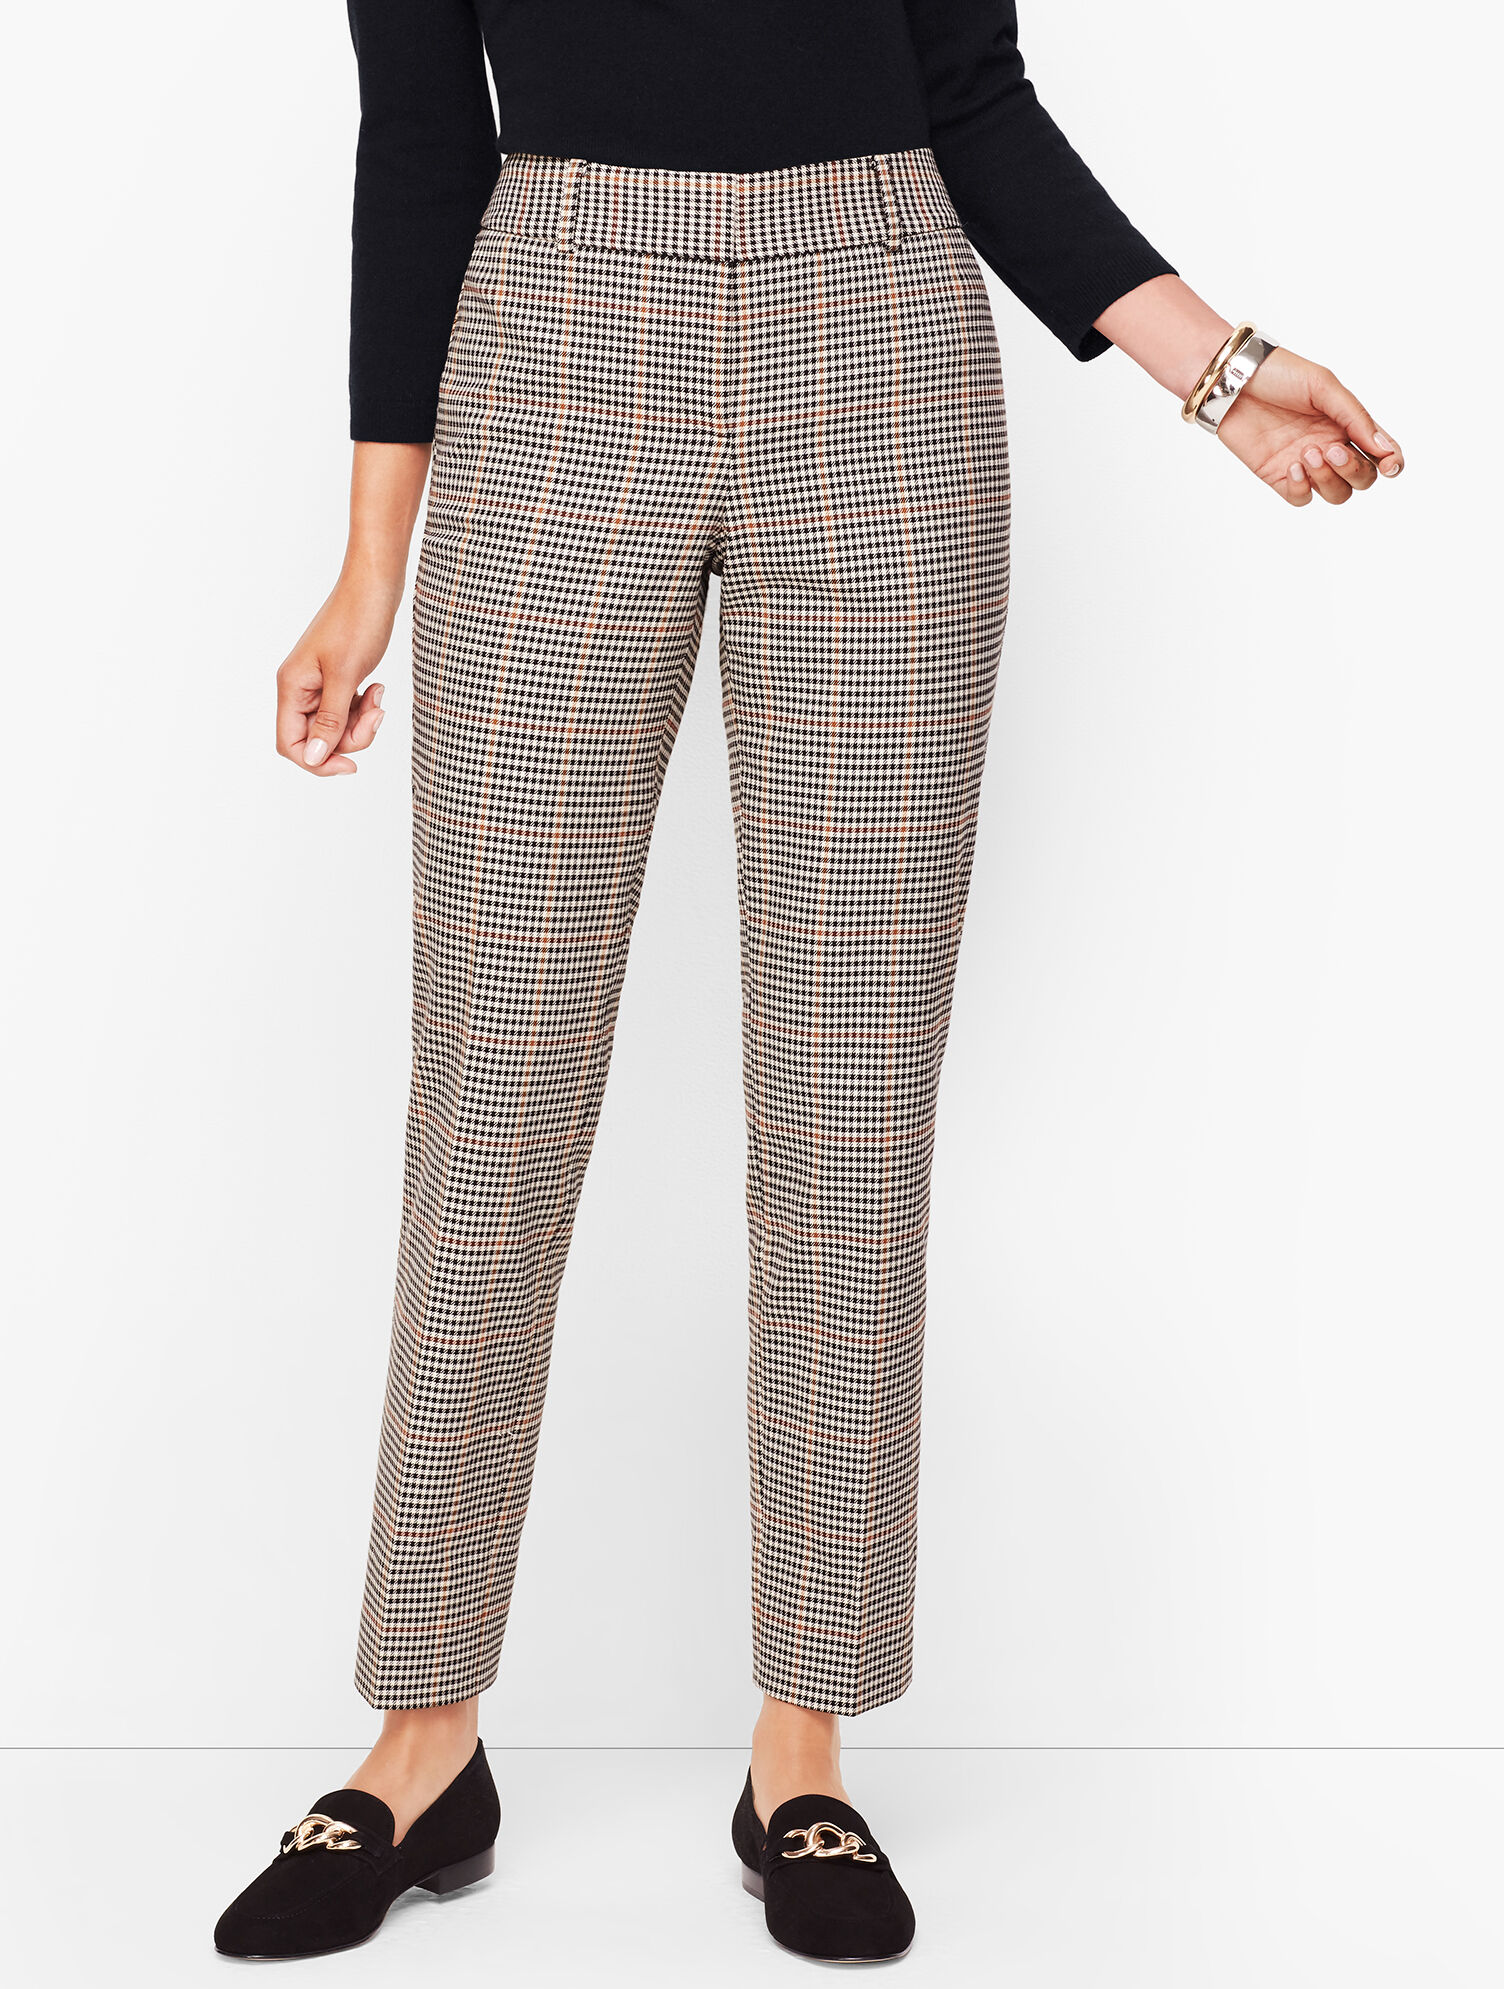 Talbots Hampshire Ankle Pants - Curvy Fit - Solid